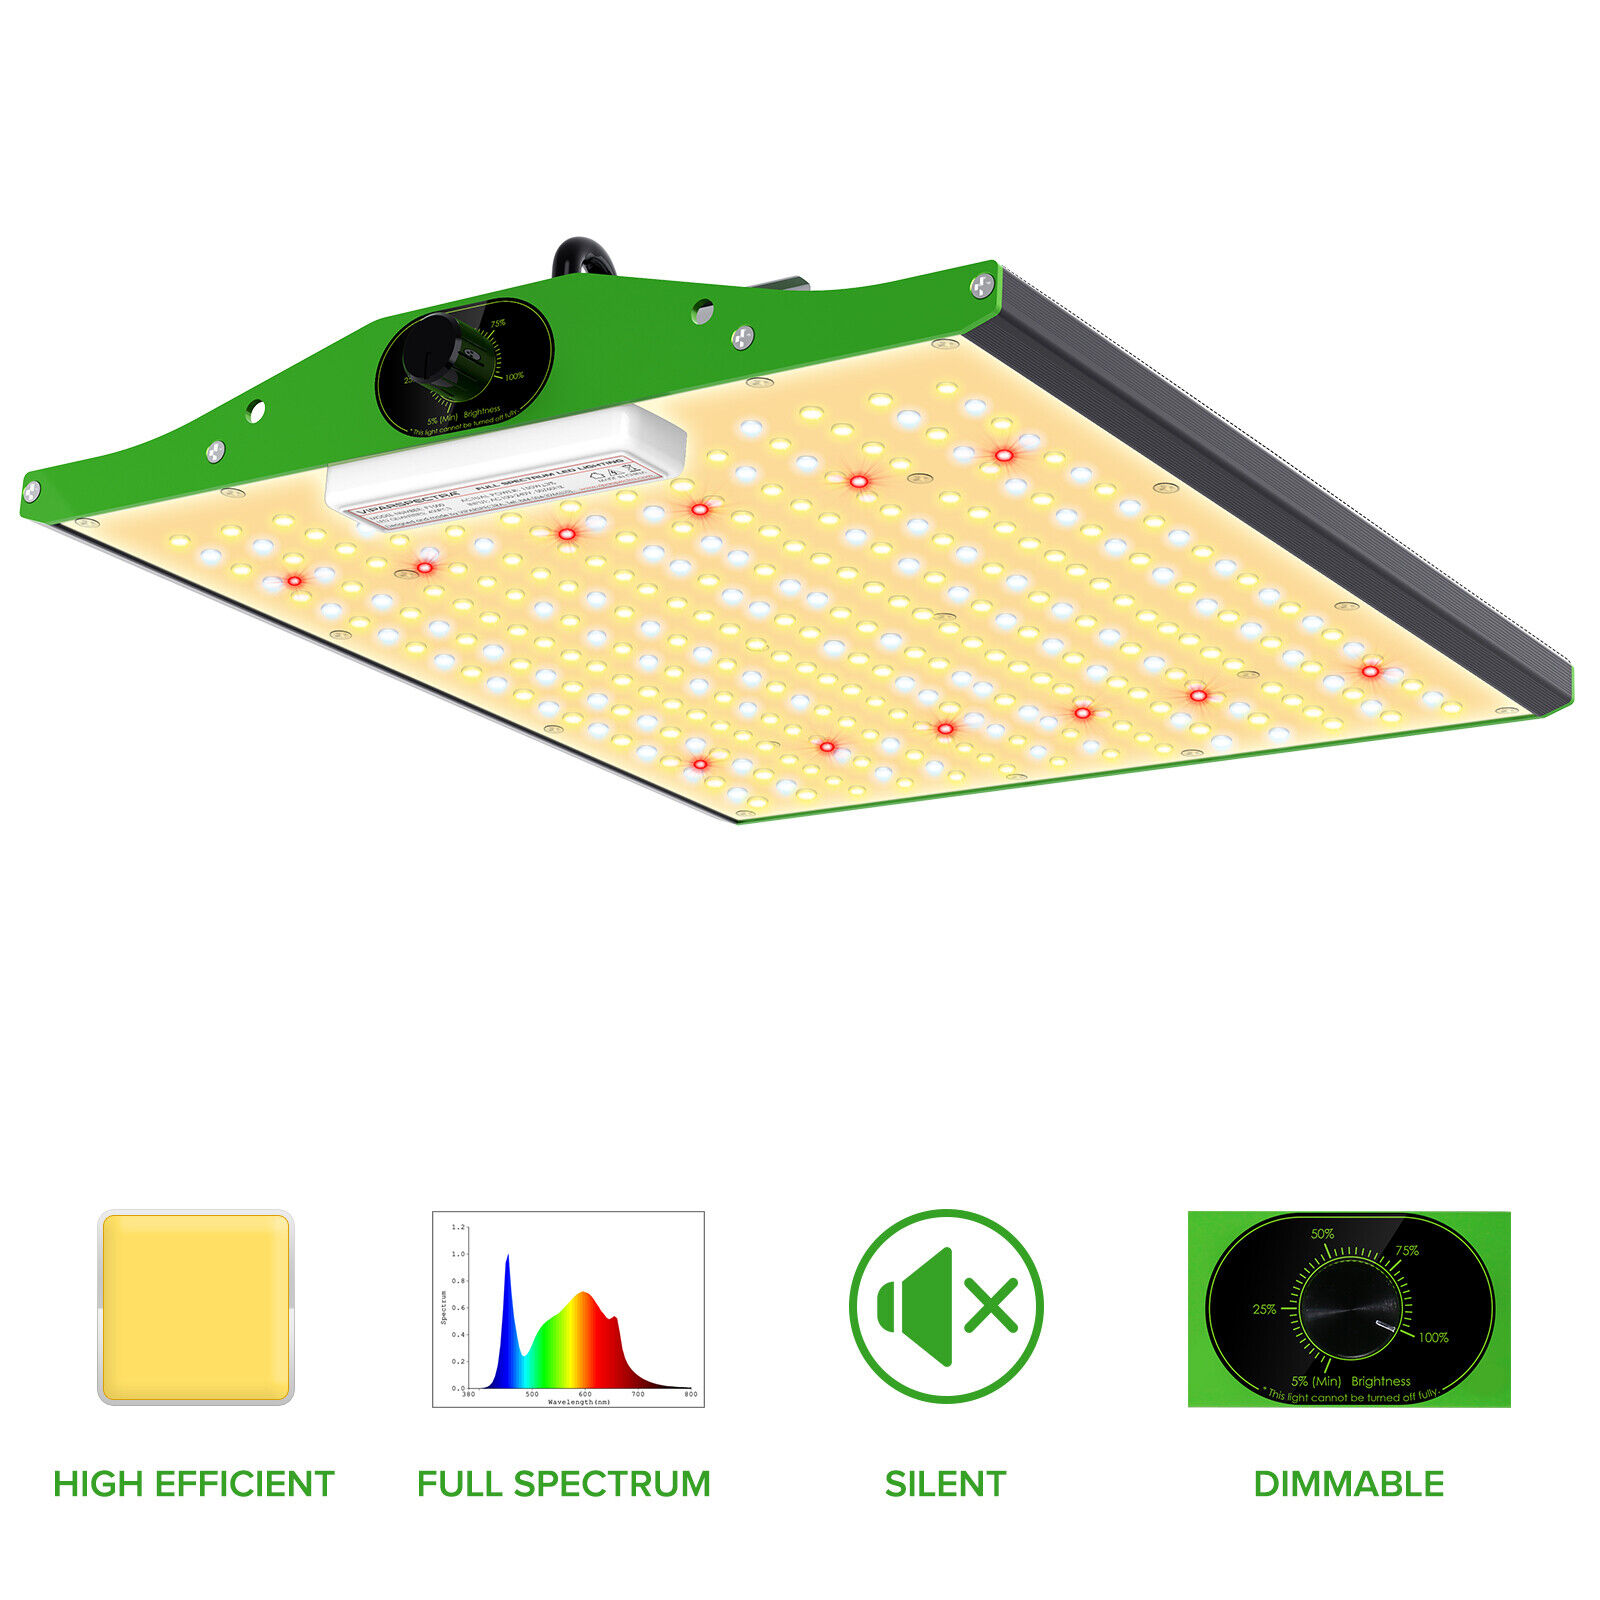 VIPARSPECTRA P1000 LED Grow Lights for Indoor Plants Veg Bloom Replace HPS HID